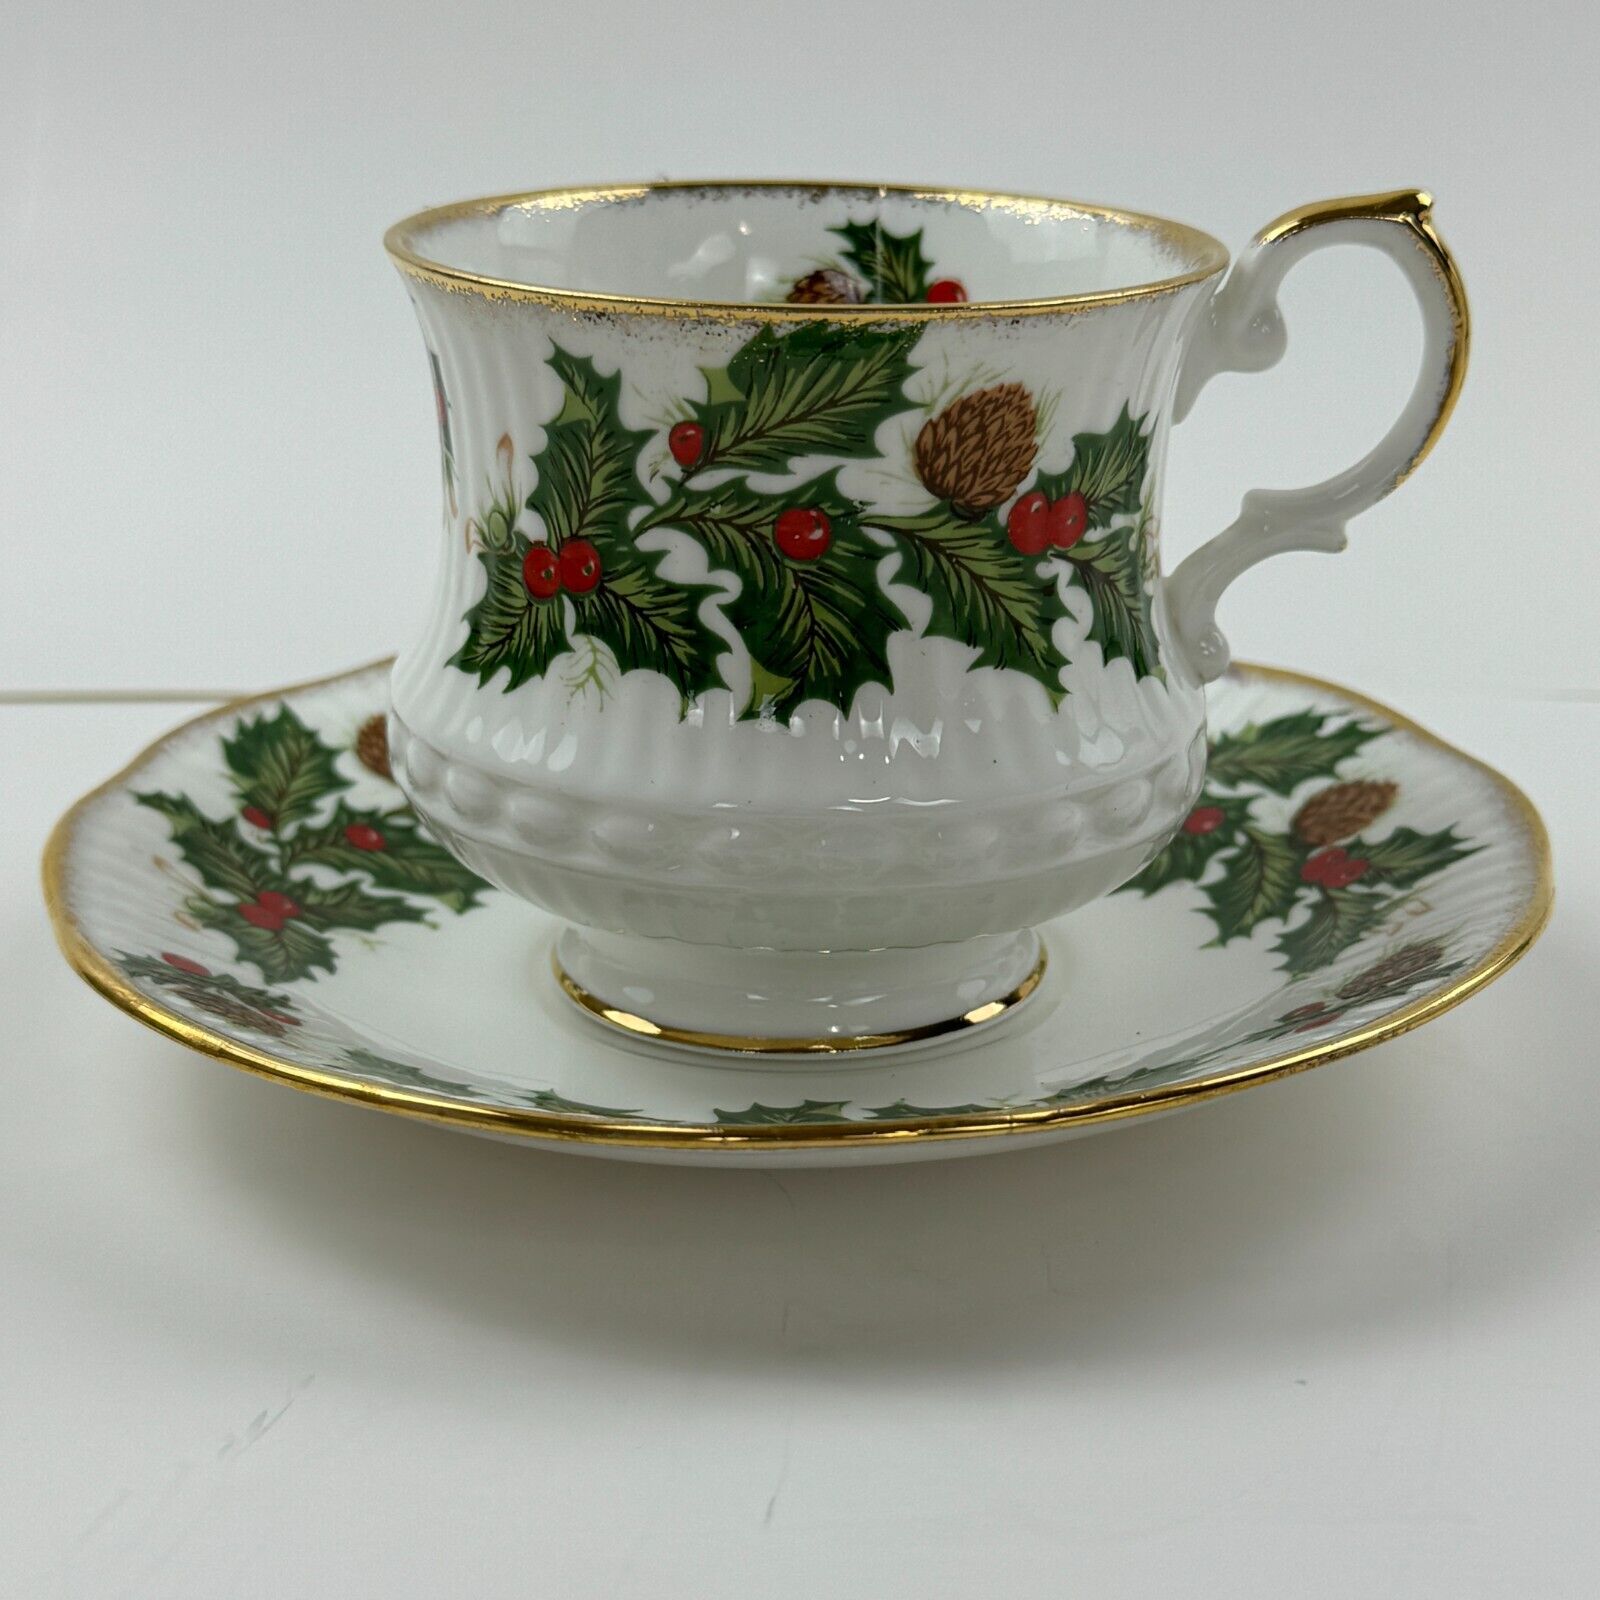 Queen's Fine Bone China Yuletide Cup And Saucer Set Rosina China Made In England